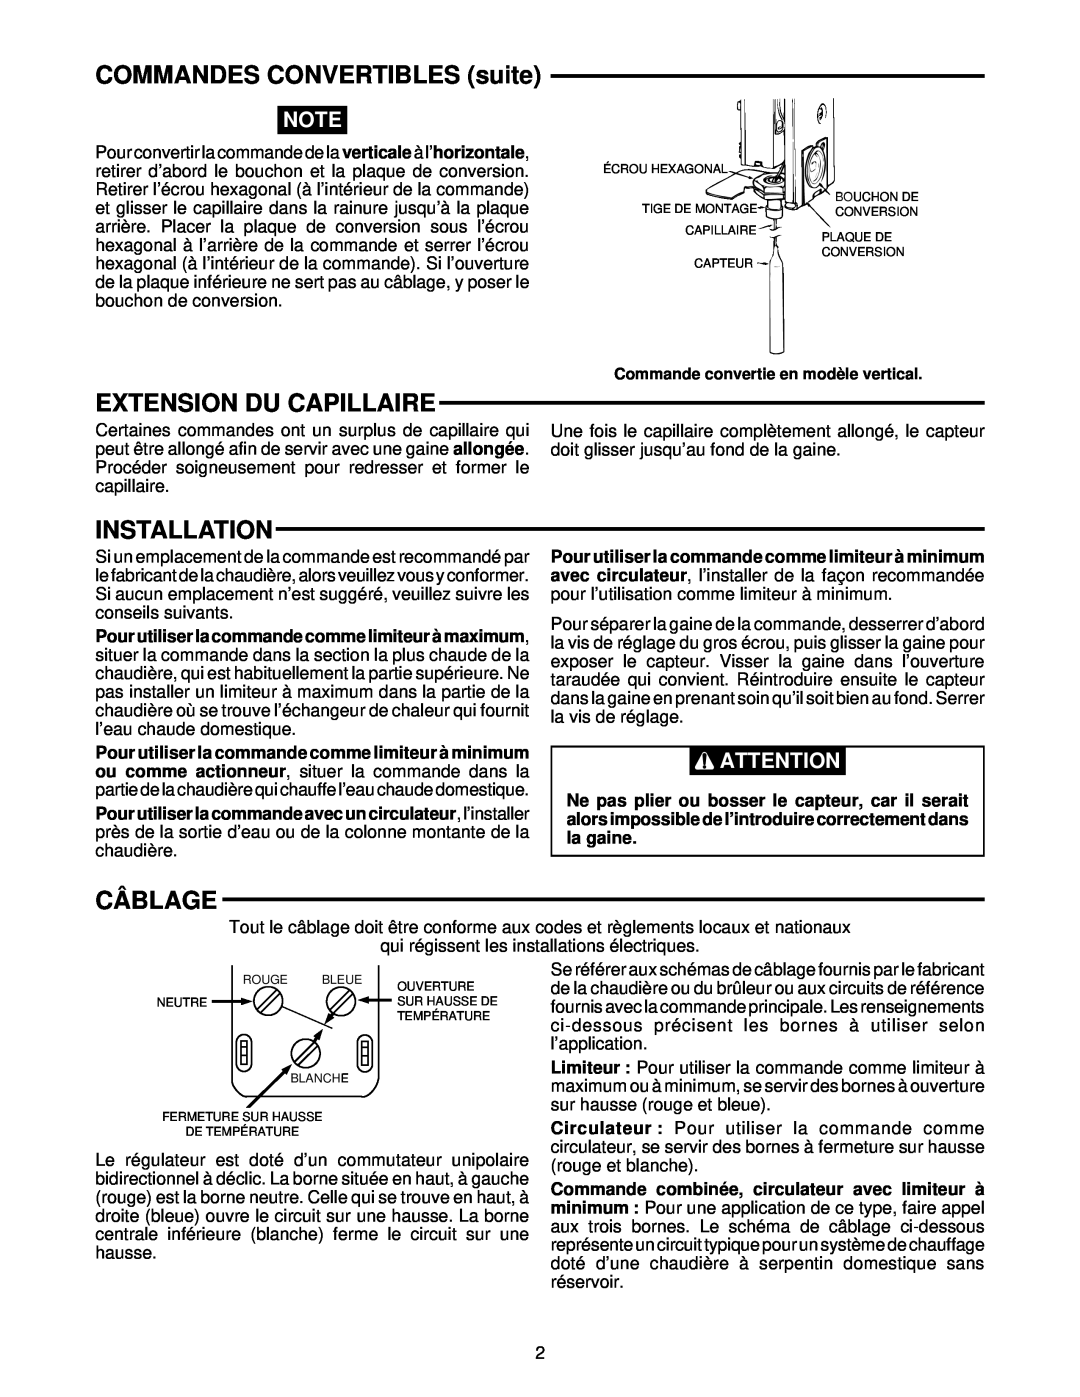 White Rodgers 1131 installation instructions COMMANDES CONVERTIBLES suite, Extension Du Capillaire, Câblage, Installation 